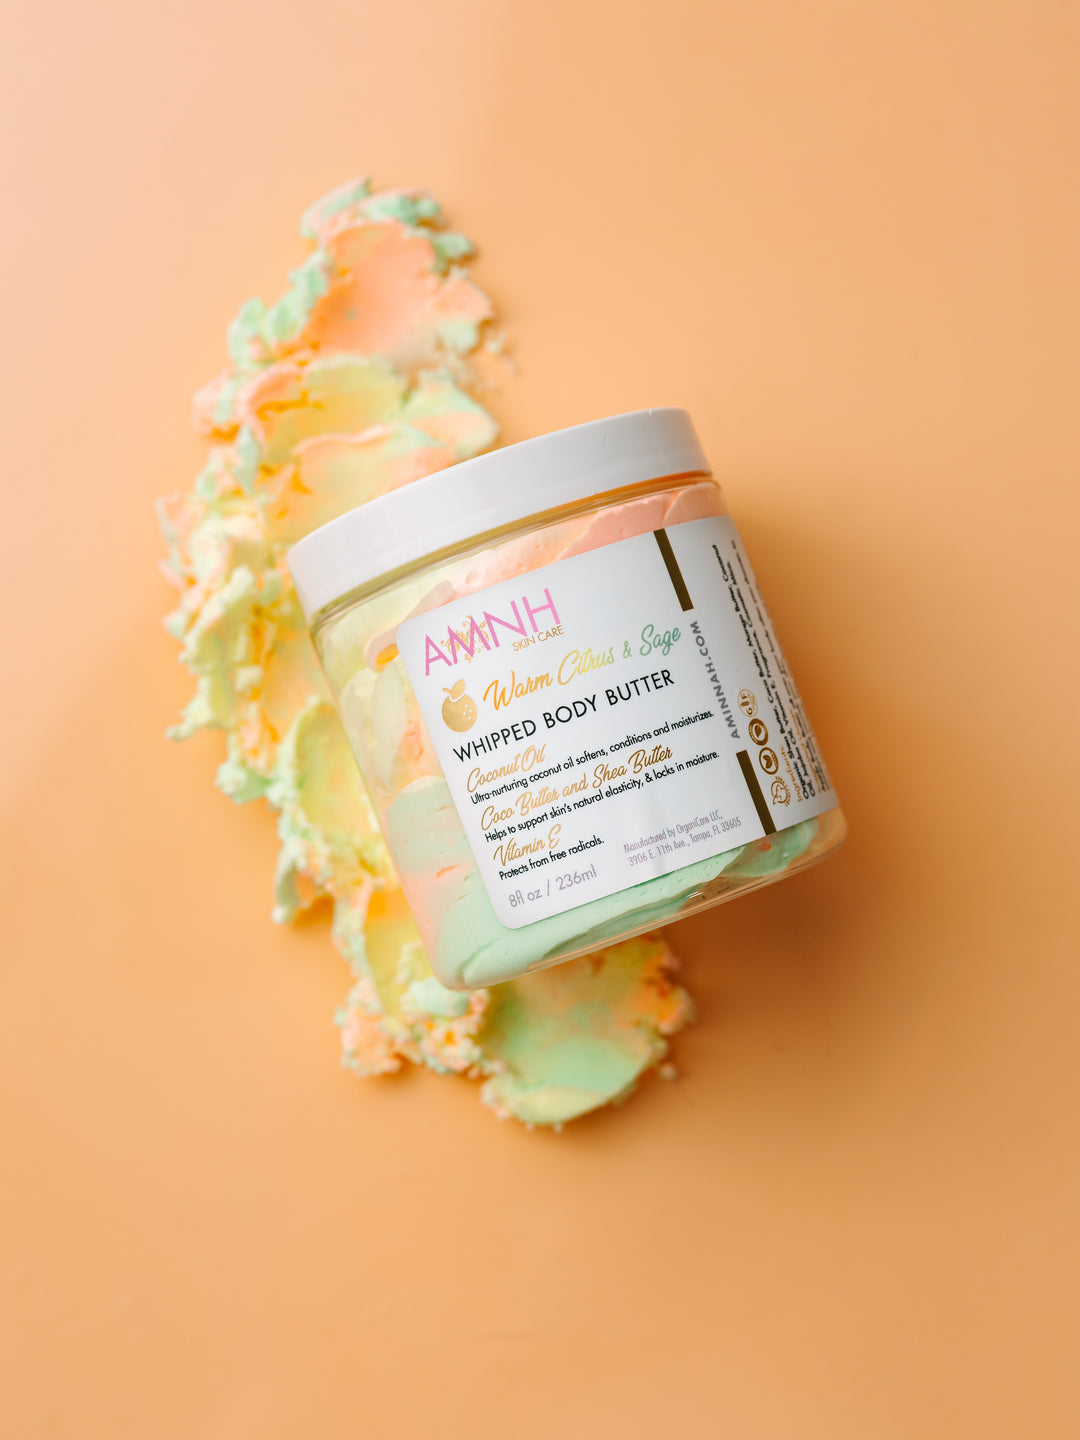 ' Warm Citrus & Sage' Whipped Body Butter